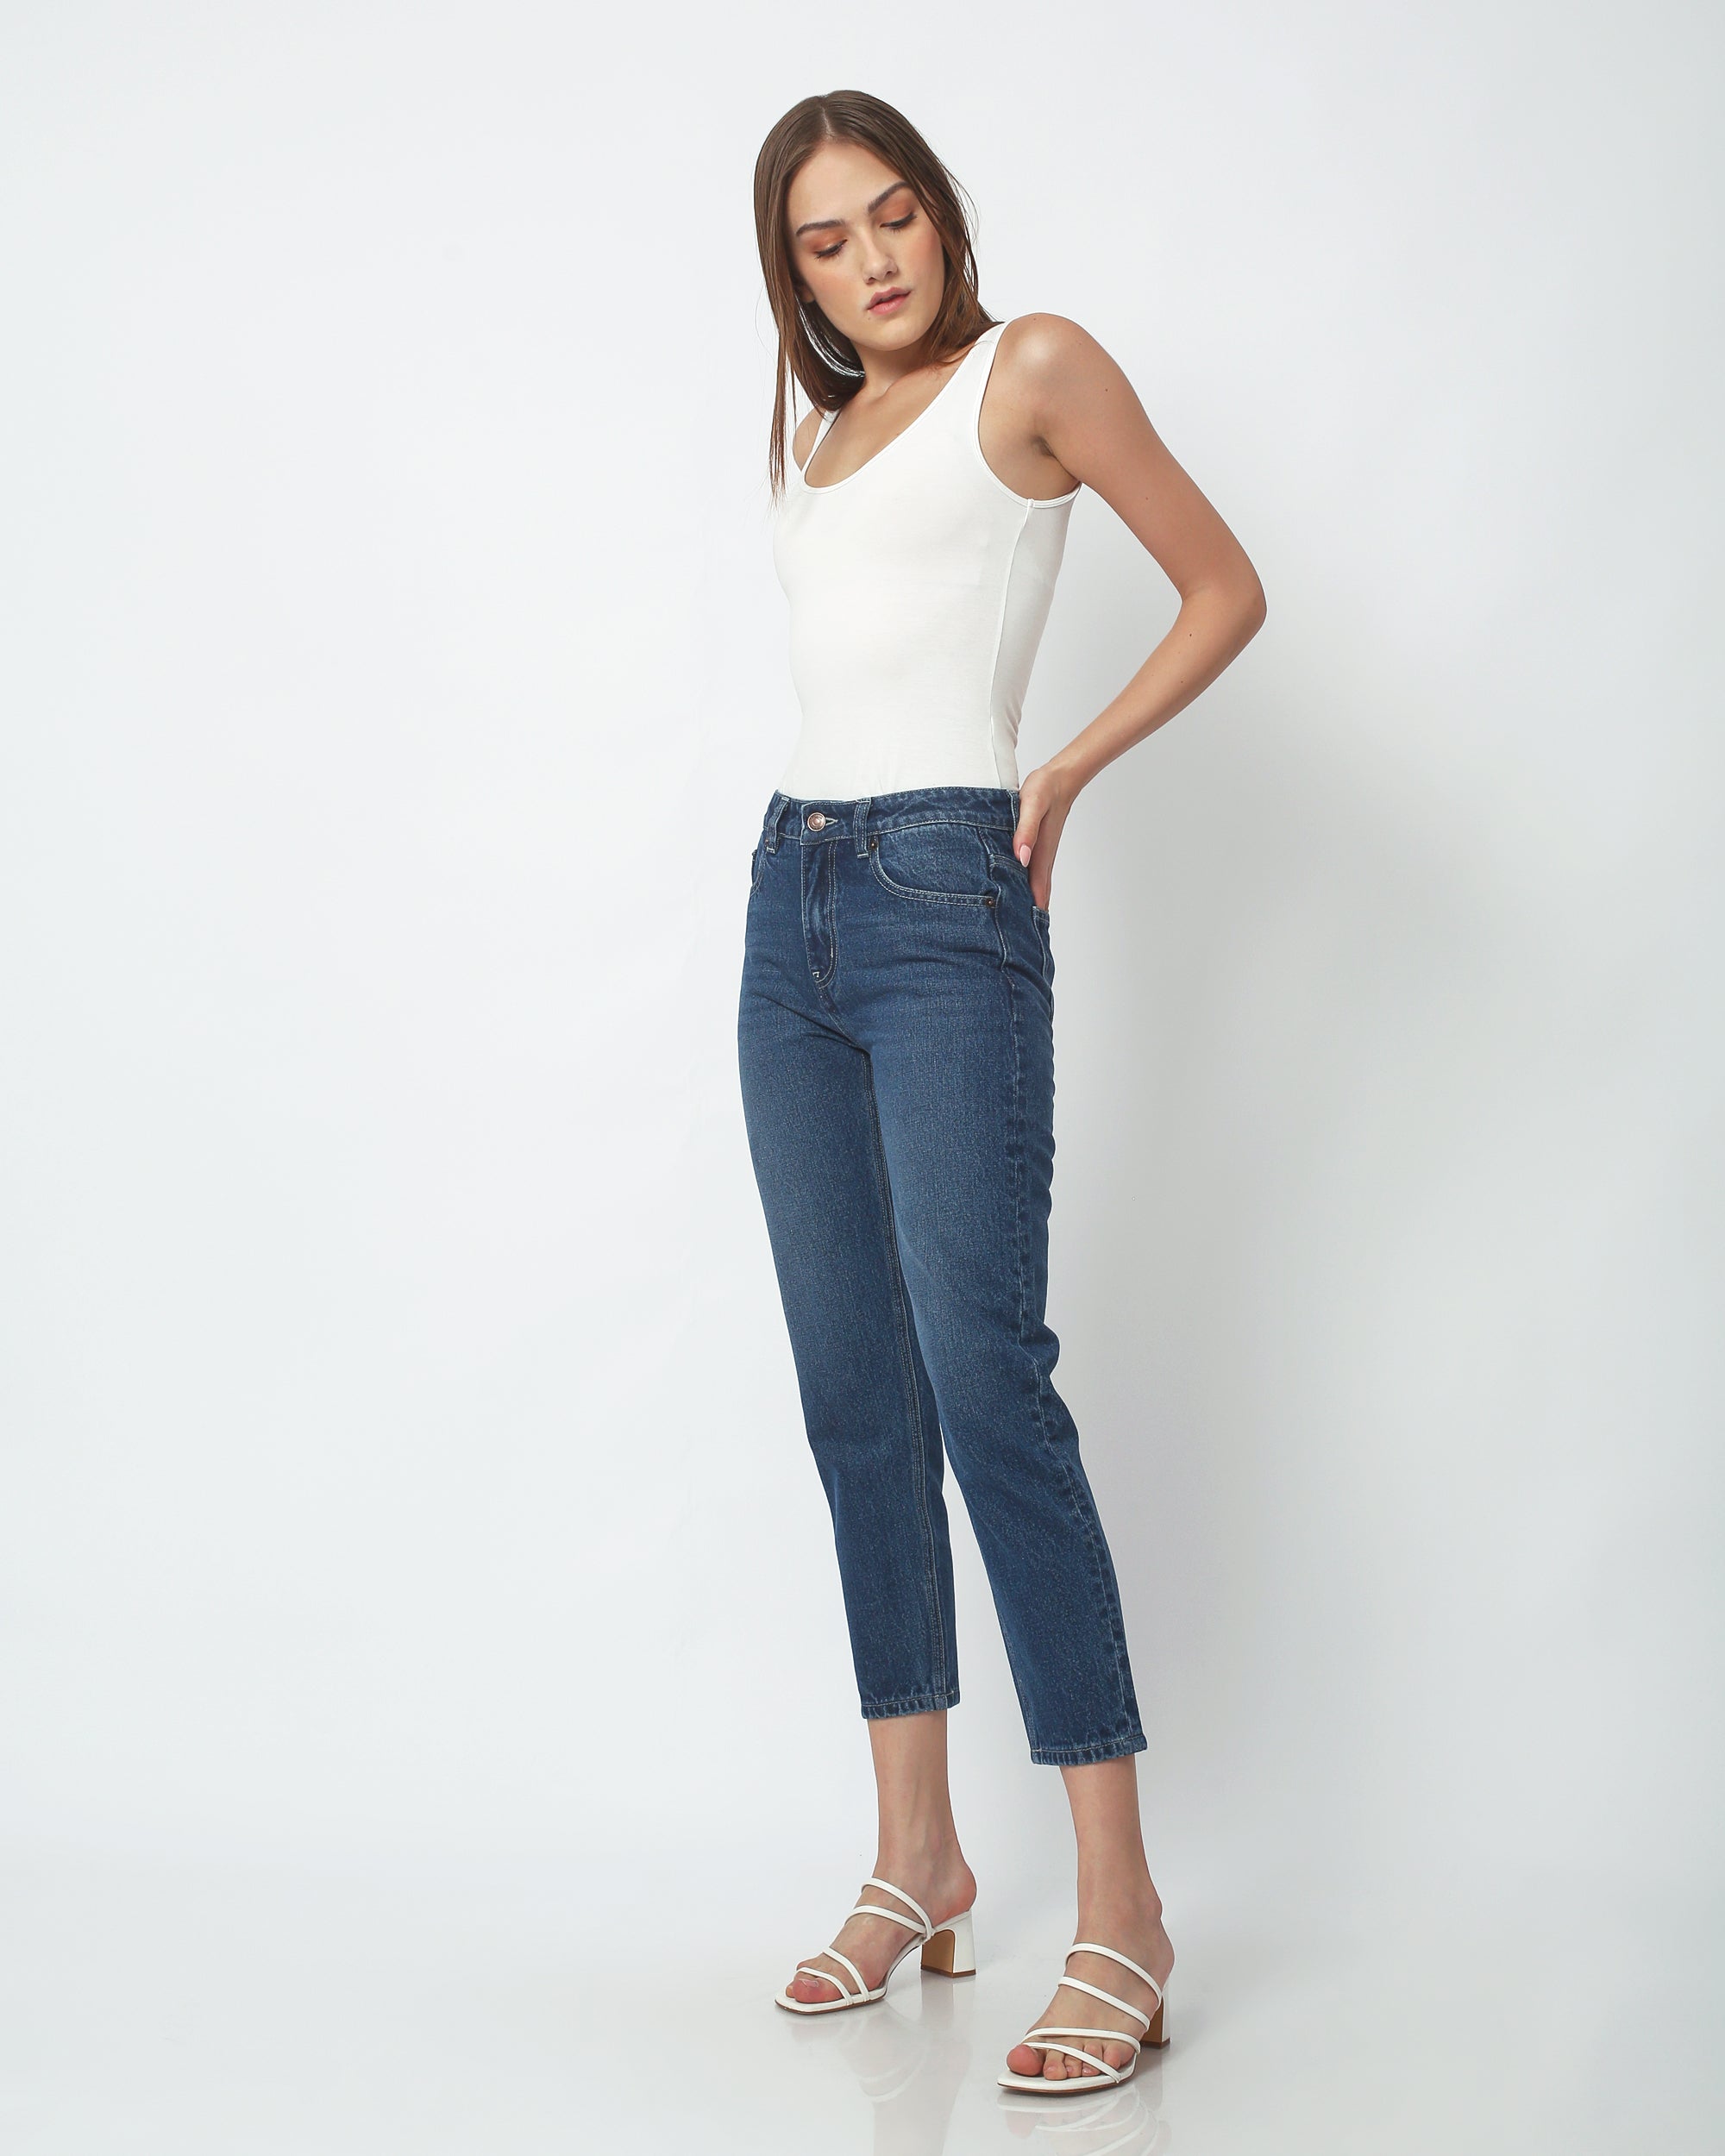 Roadster Women Blue Skinny Fit Mid-Rise Clean Look Stretchable Jeans Price  in India, Full Specifications & Offers | DTashion.com